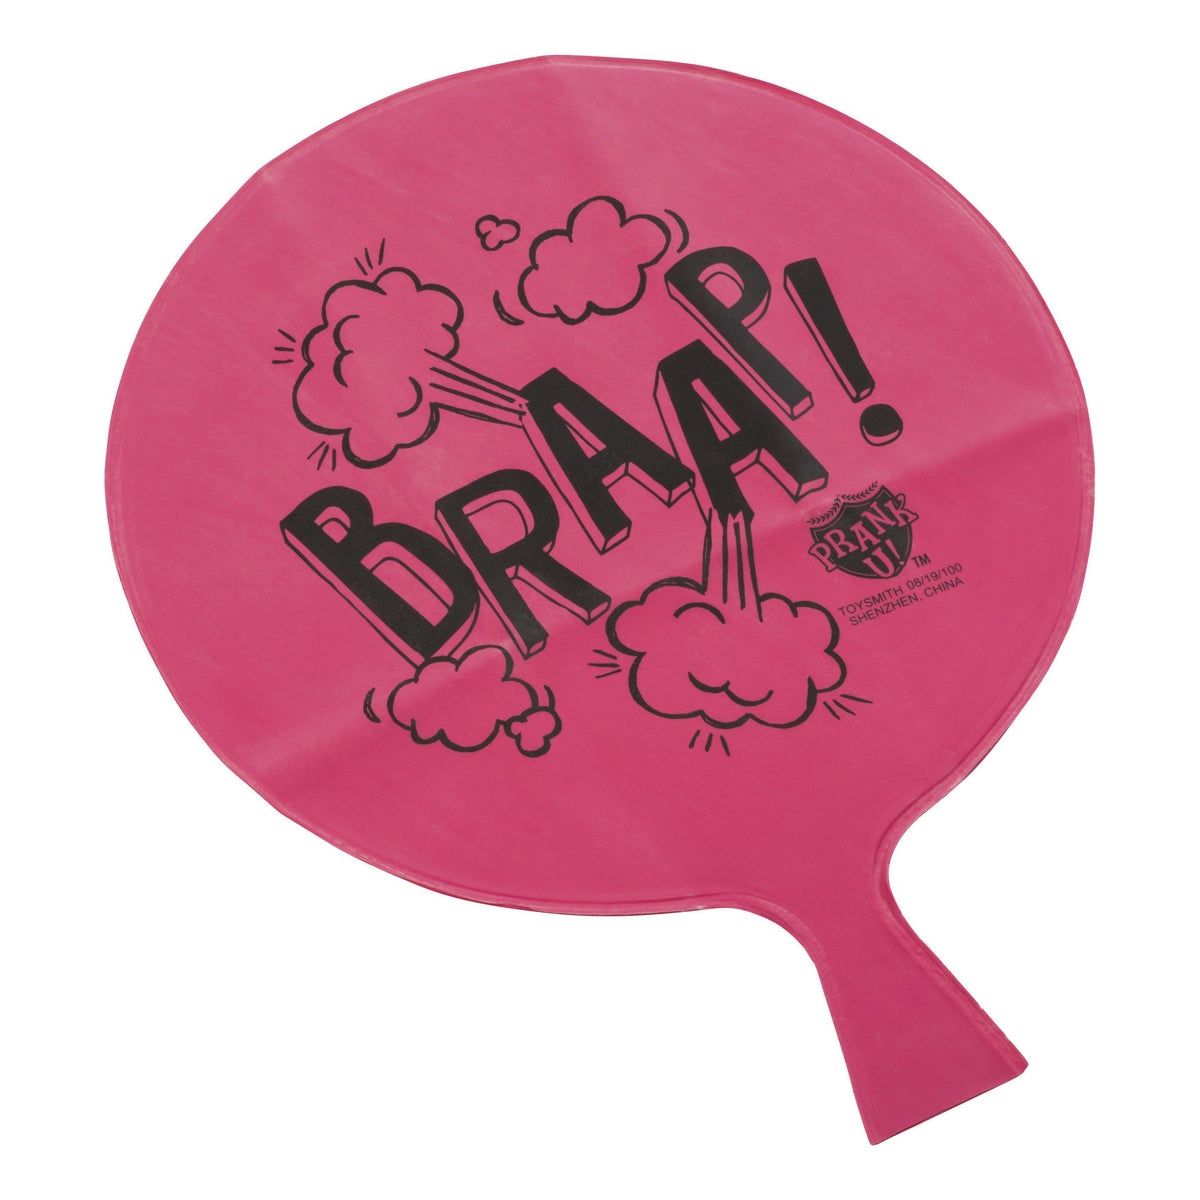 Top view of a deflated whoopee cushion out of the package.